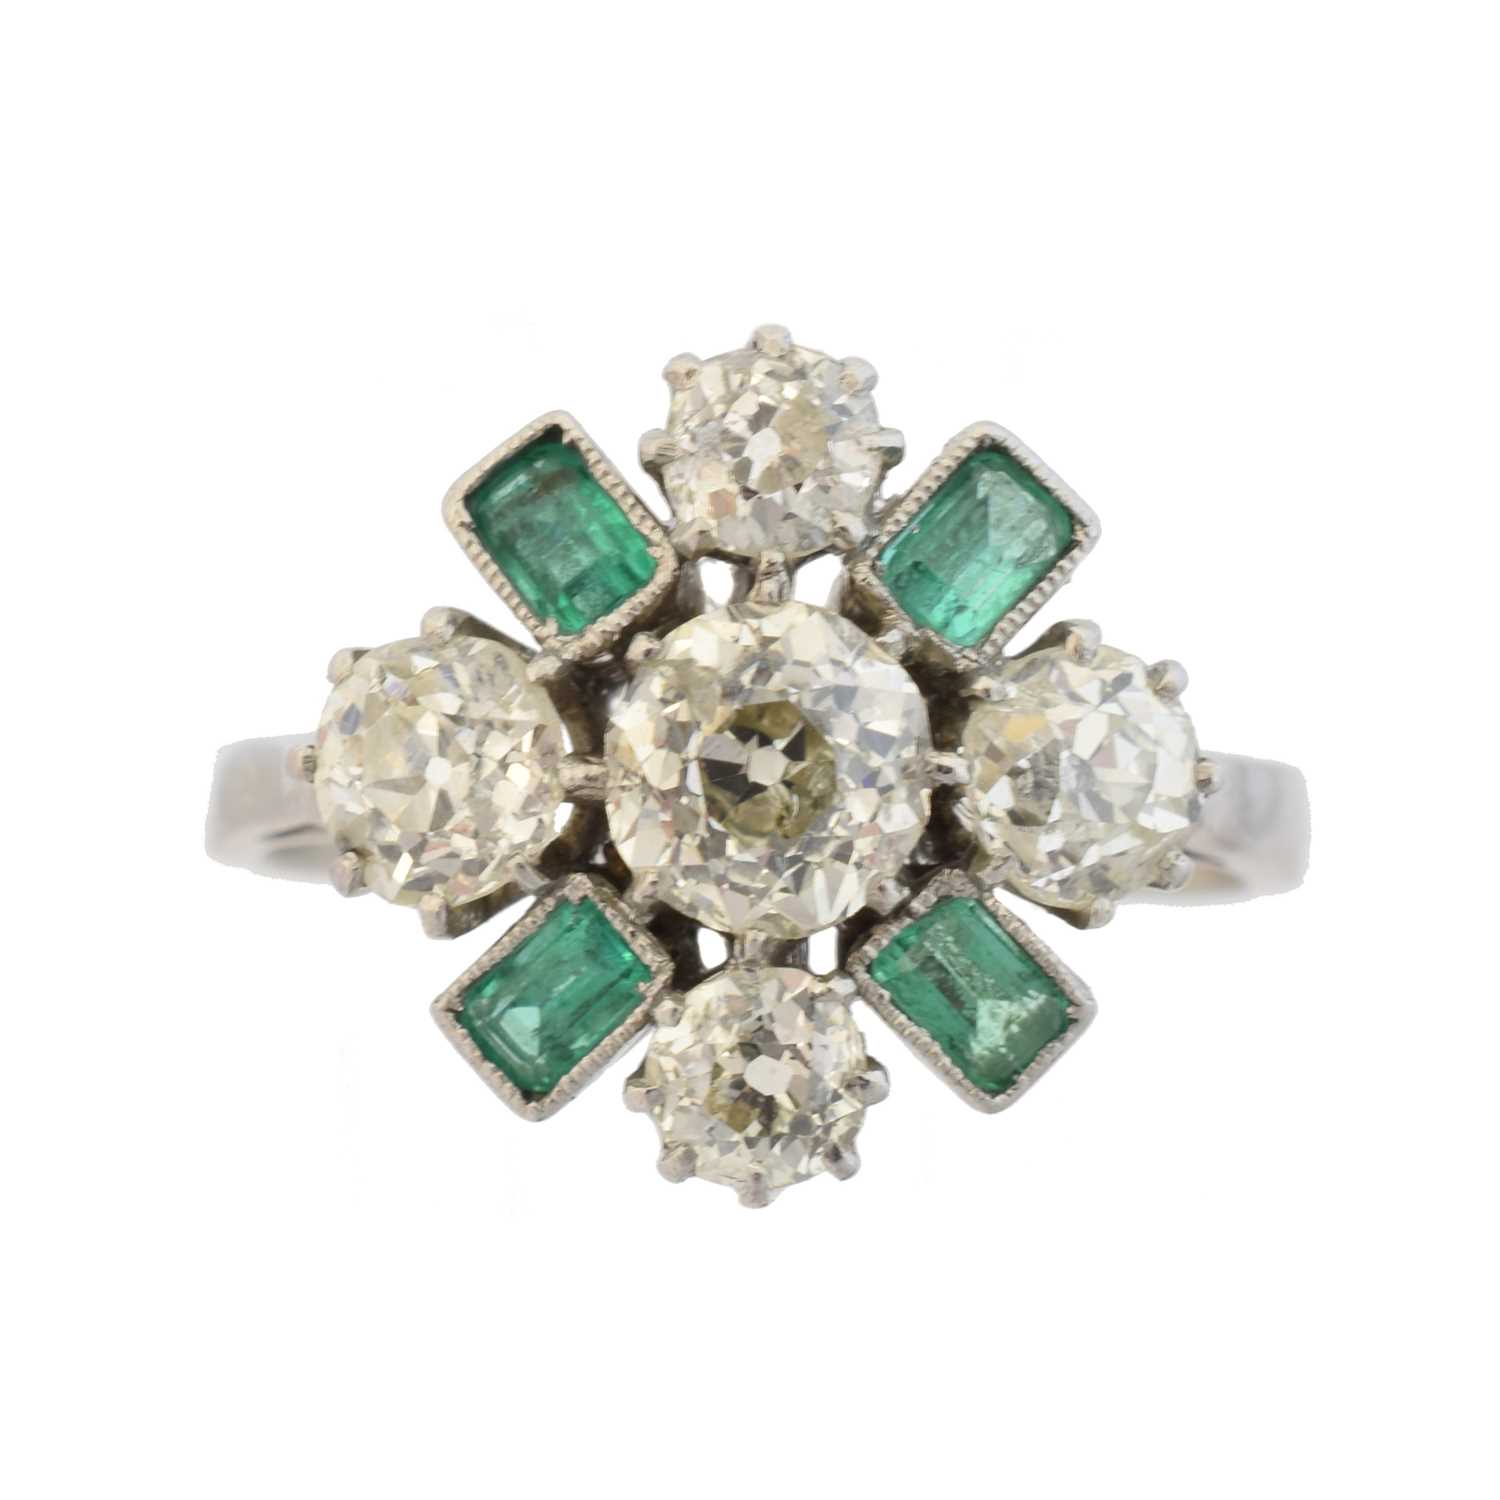 Lot 139 - An emerald and diamond cluster ring